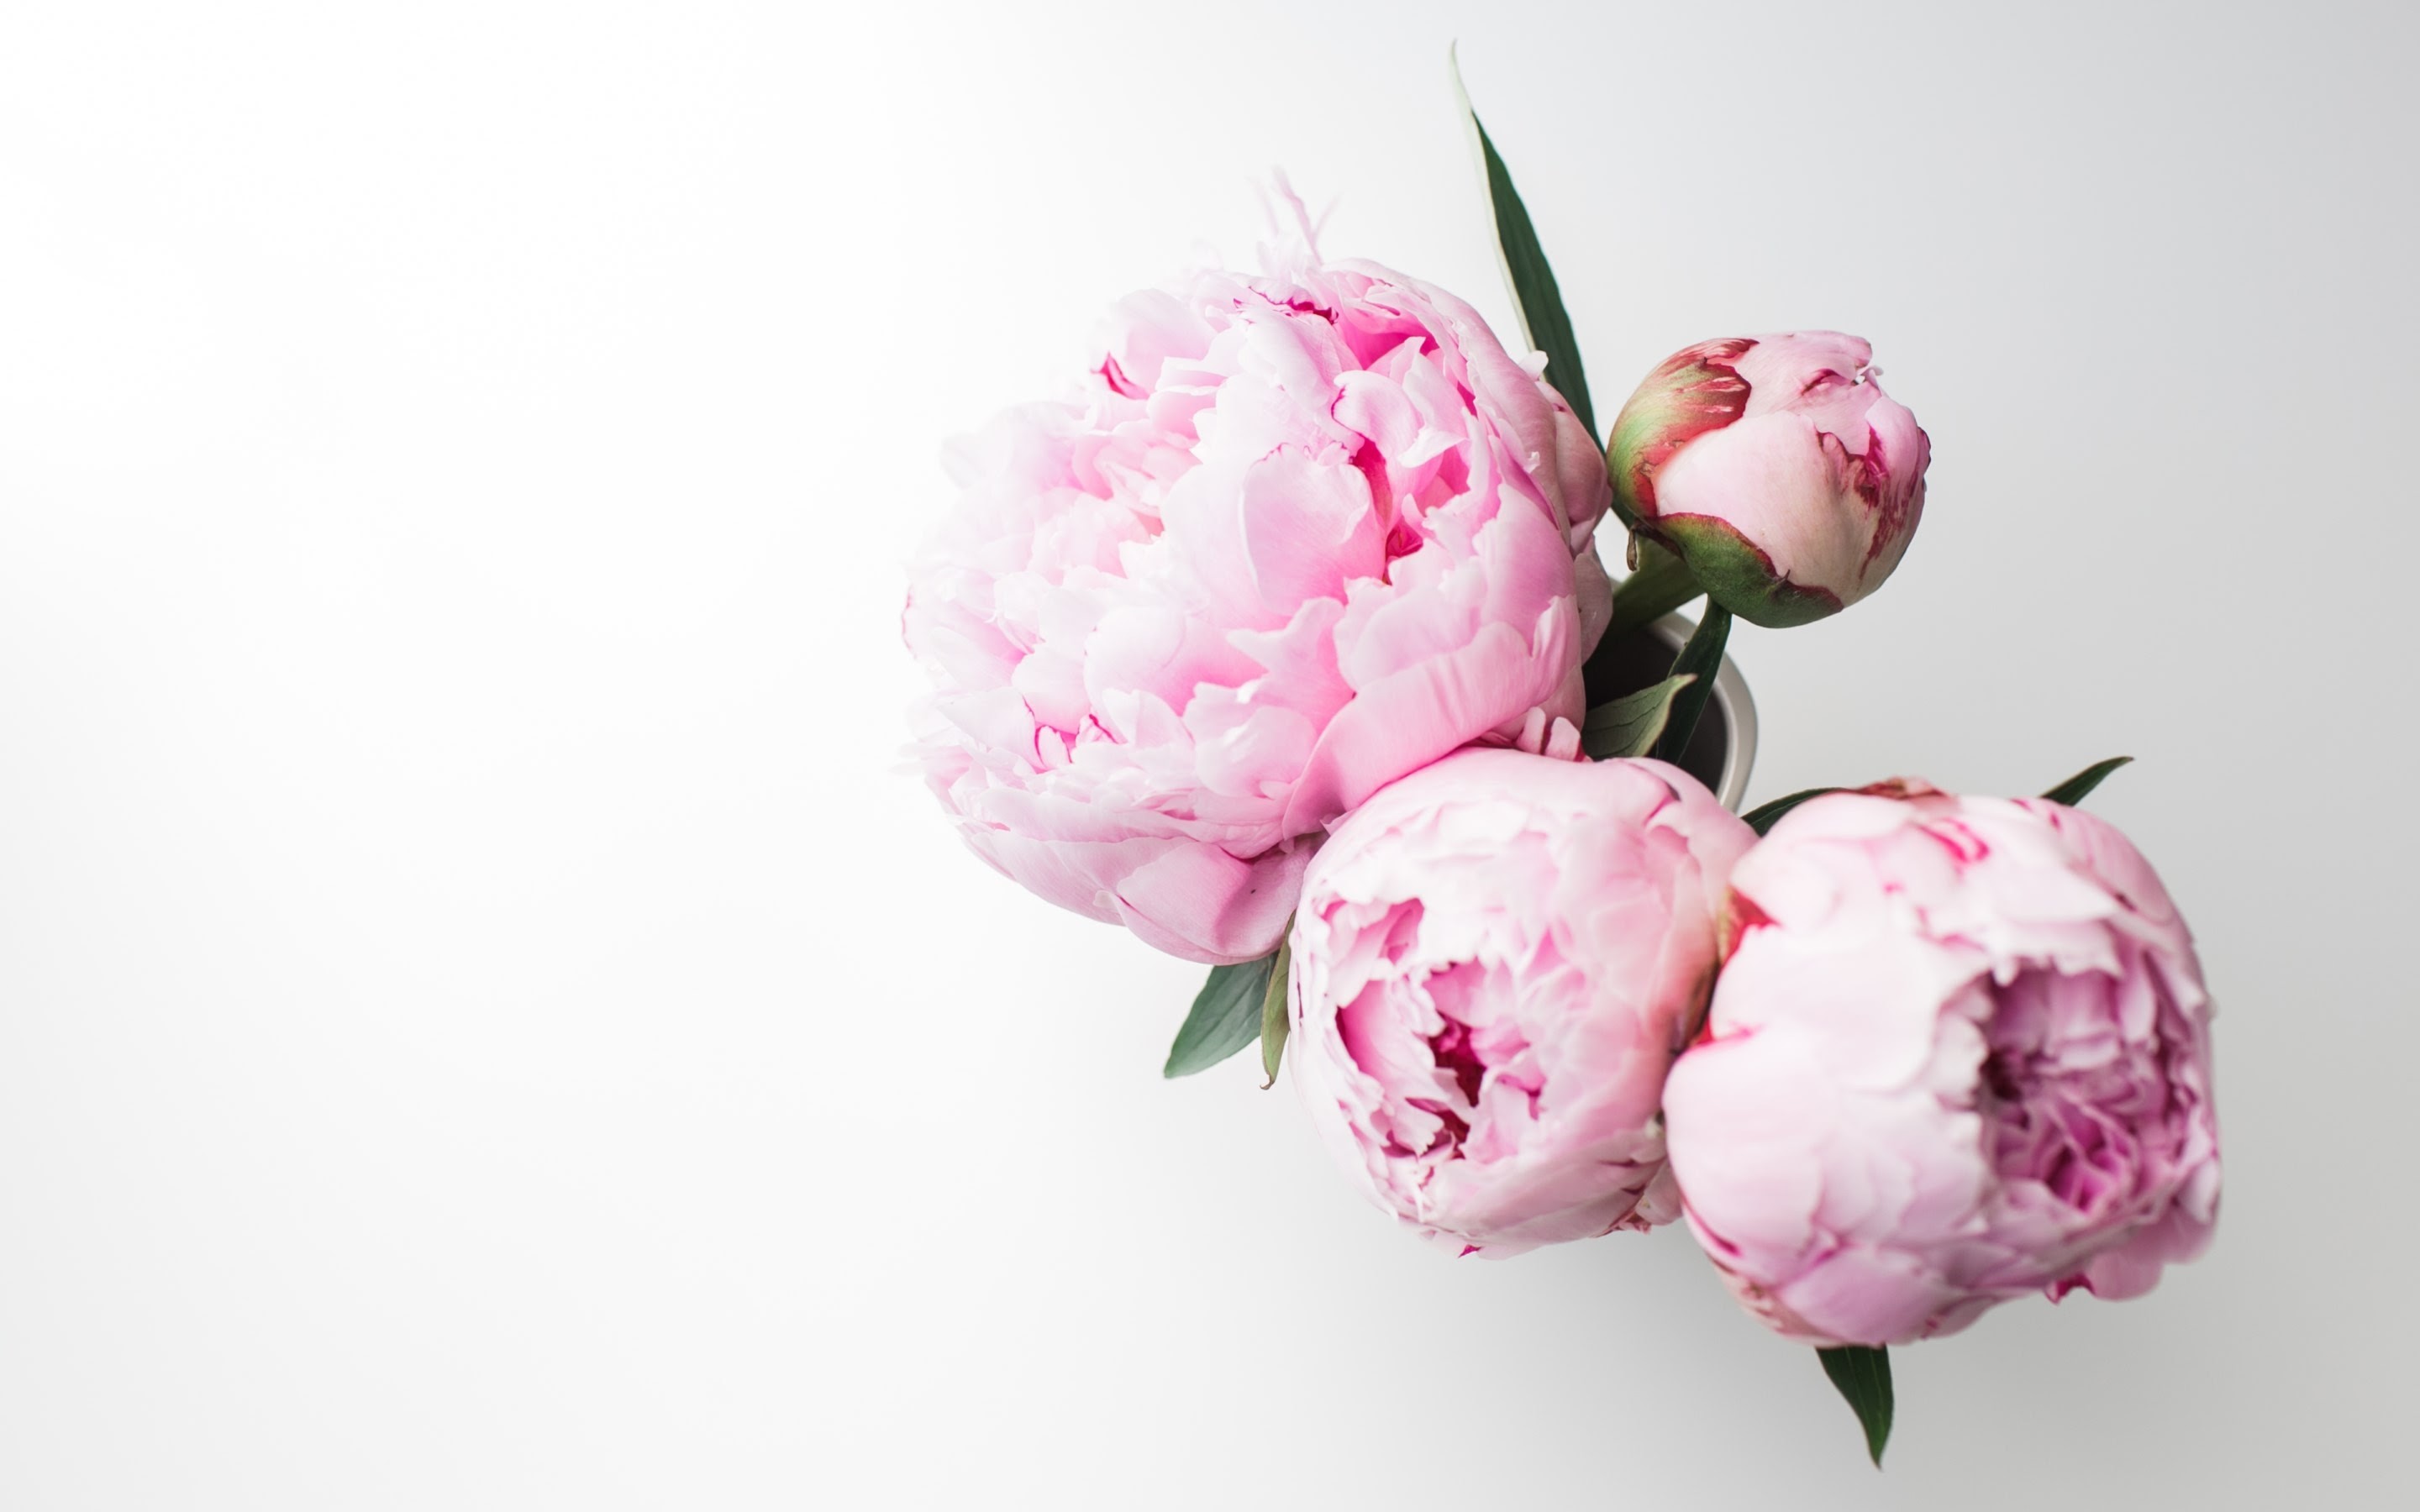 2880x1800 4K HD Wallpaper: Bouquet of Peonies Â· By Andreea with a Canon EOS 5D Mark II